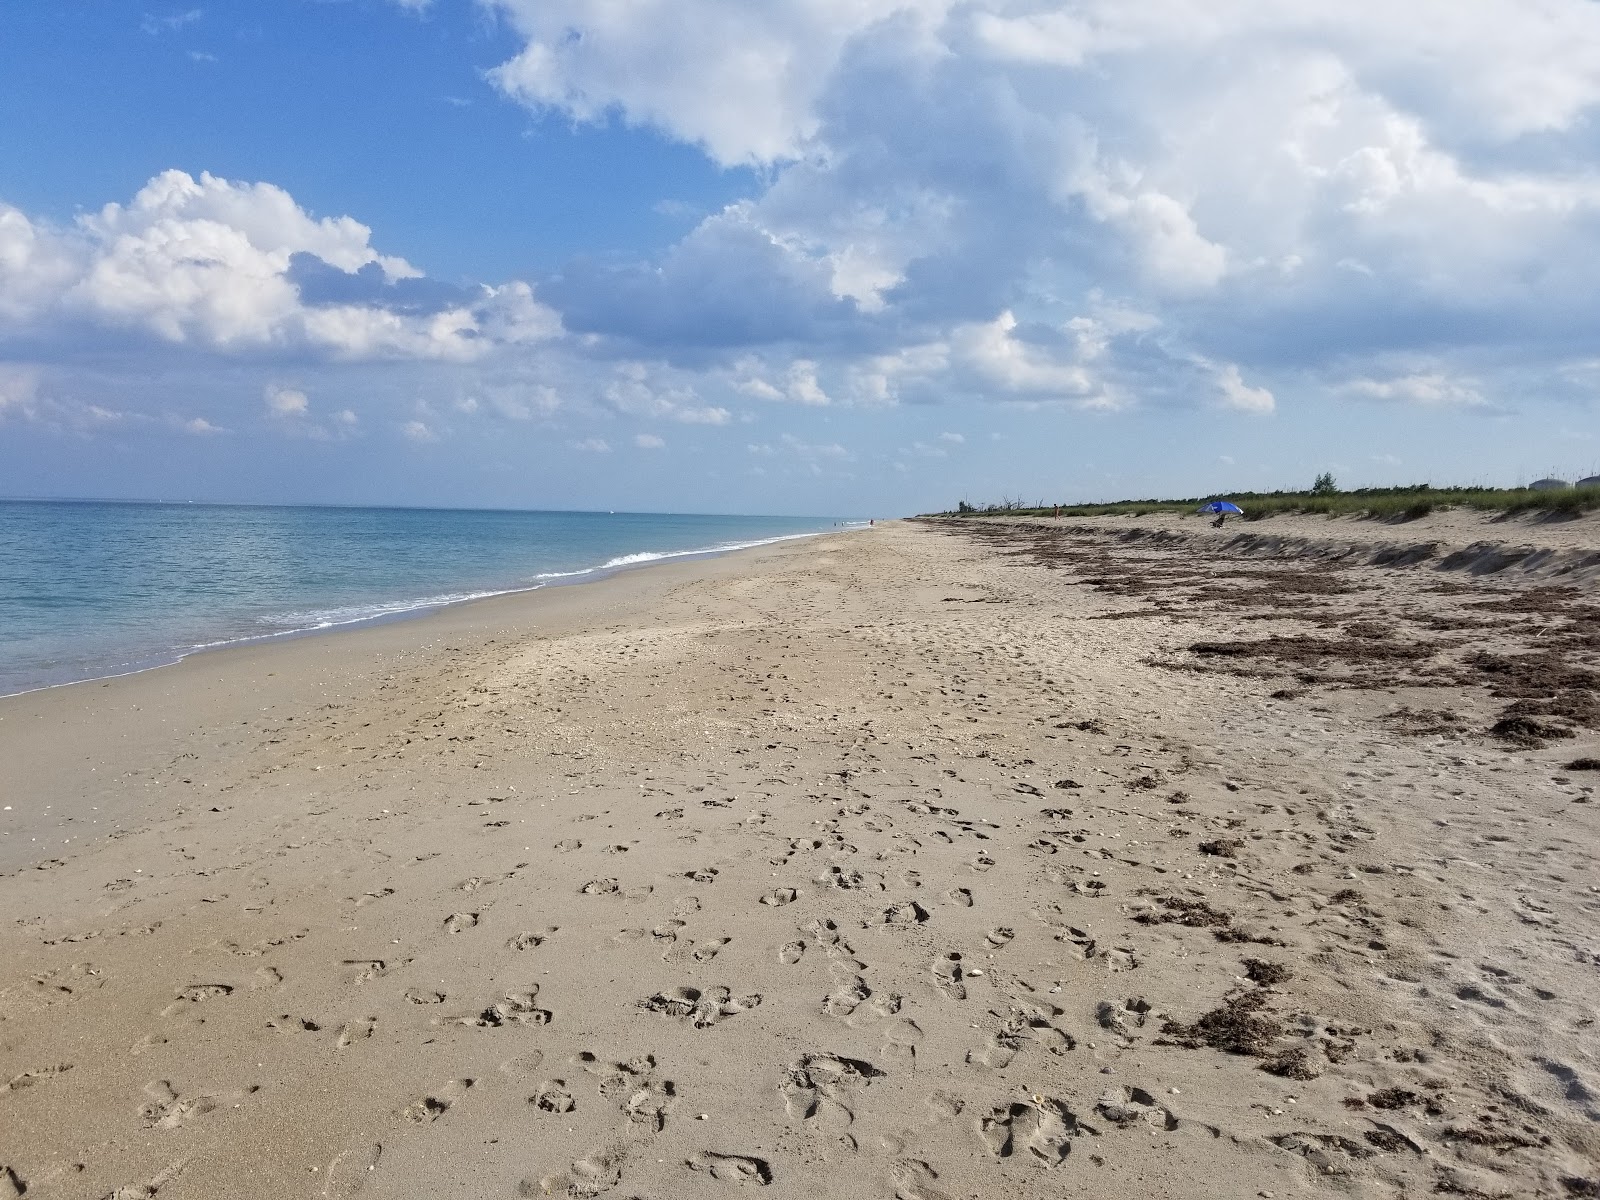 alphonso reed recommends Blind Creek Beach Florida